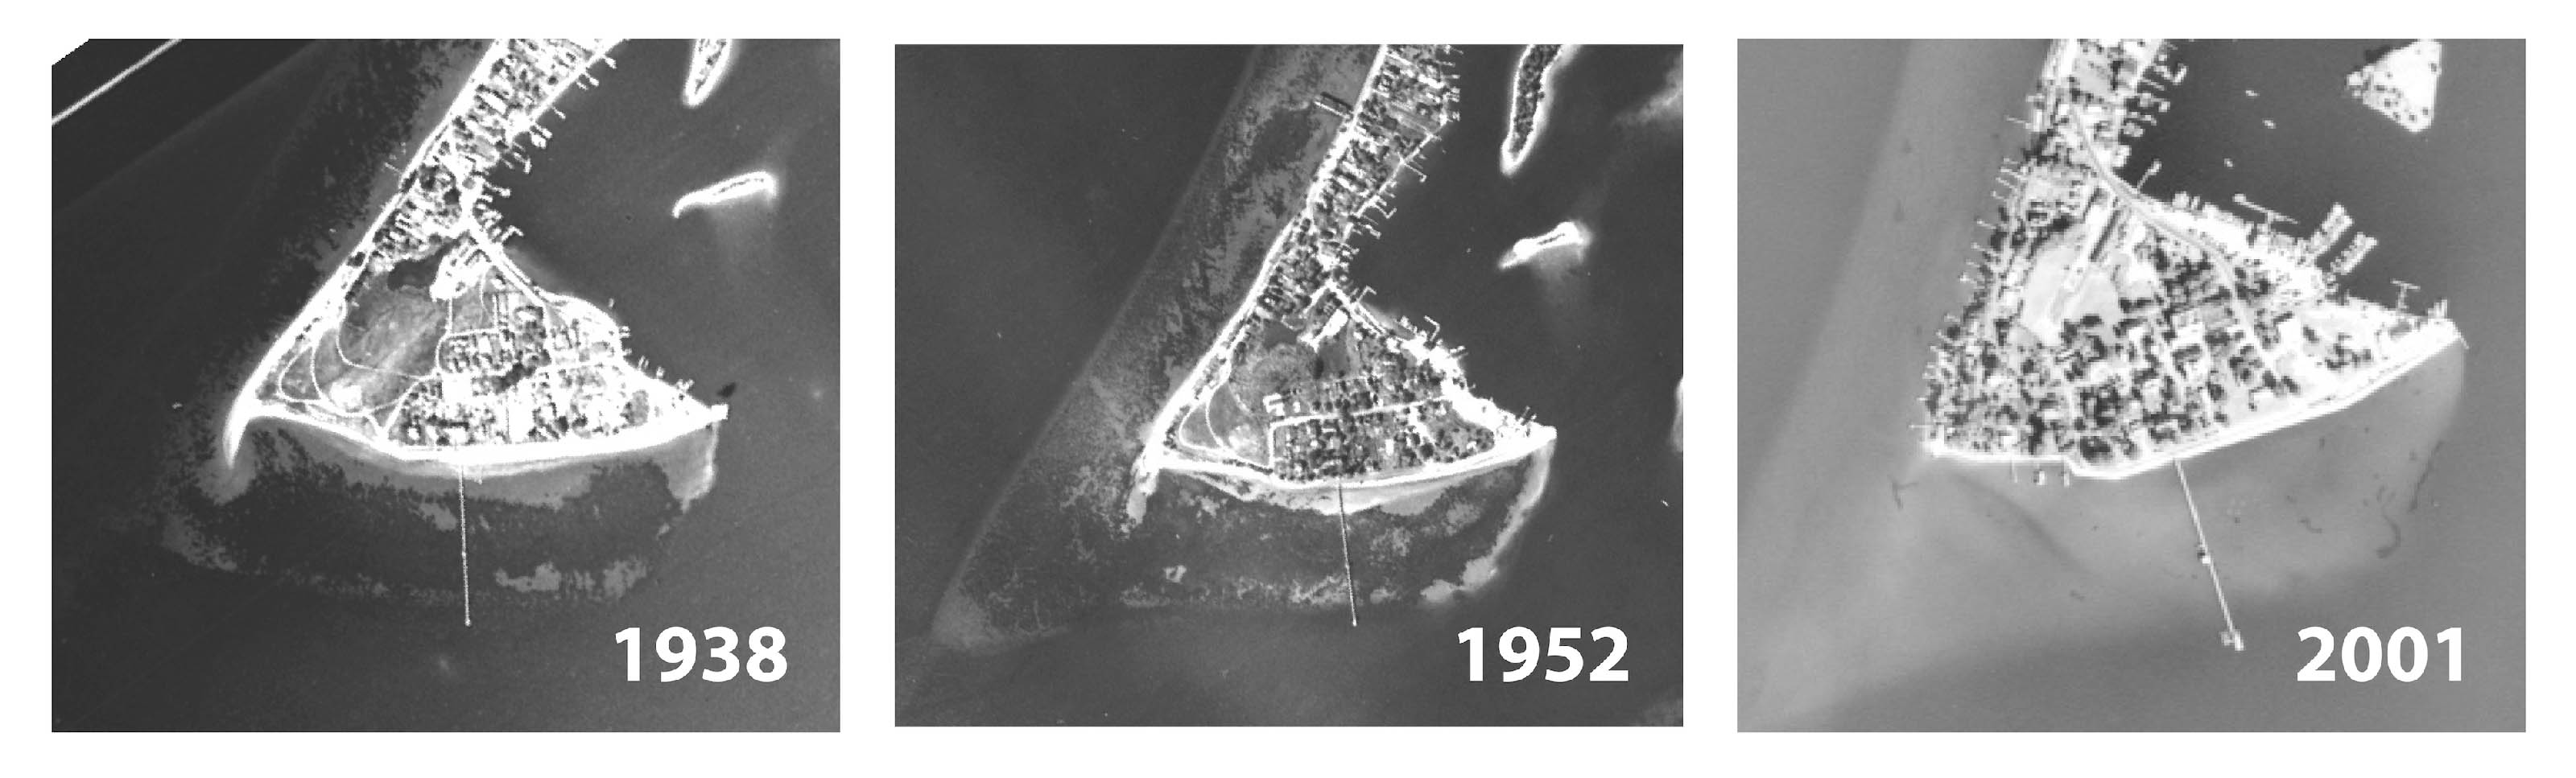 Time series photo collage showing disappearance of SAV off Solomons, Maryland.